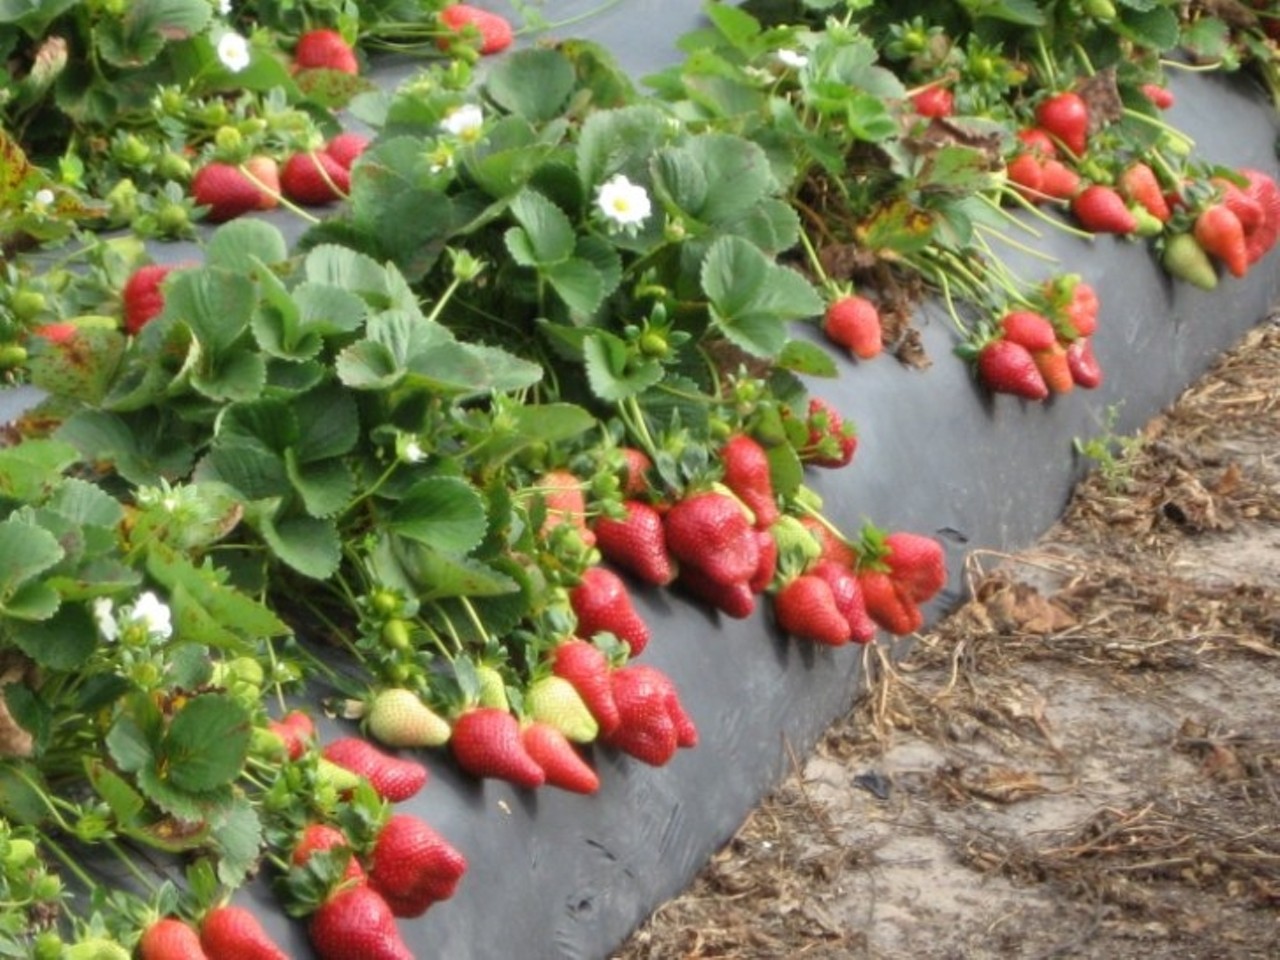 Spivey Farms 
6101 County Road 39 South, Plant City
Spivey Farms will open a U-Pick strawberry field on Saturday, March 13, from 9 a.m. to 4 p.m. Though for now that is the only announced date, Spivey will announce more dates for U-Picks on their website and social media.
Photo via Spivey Farms/Facebook